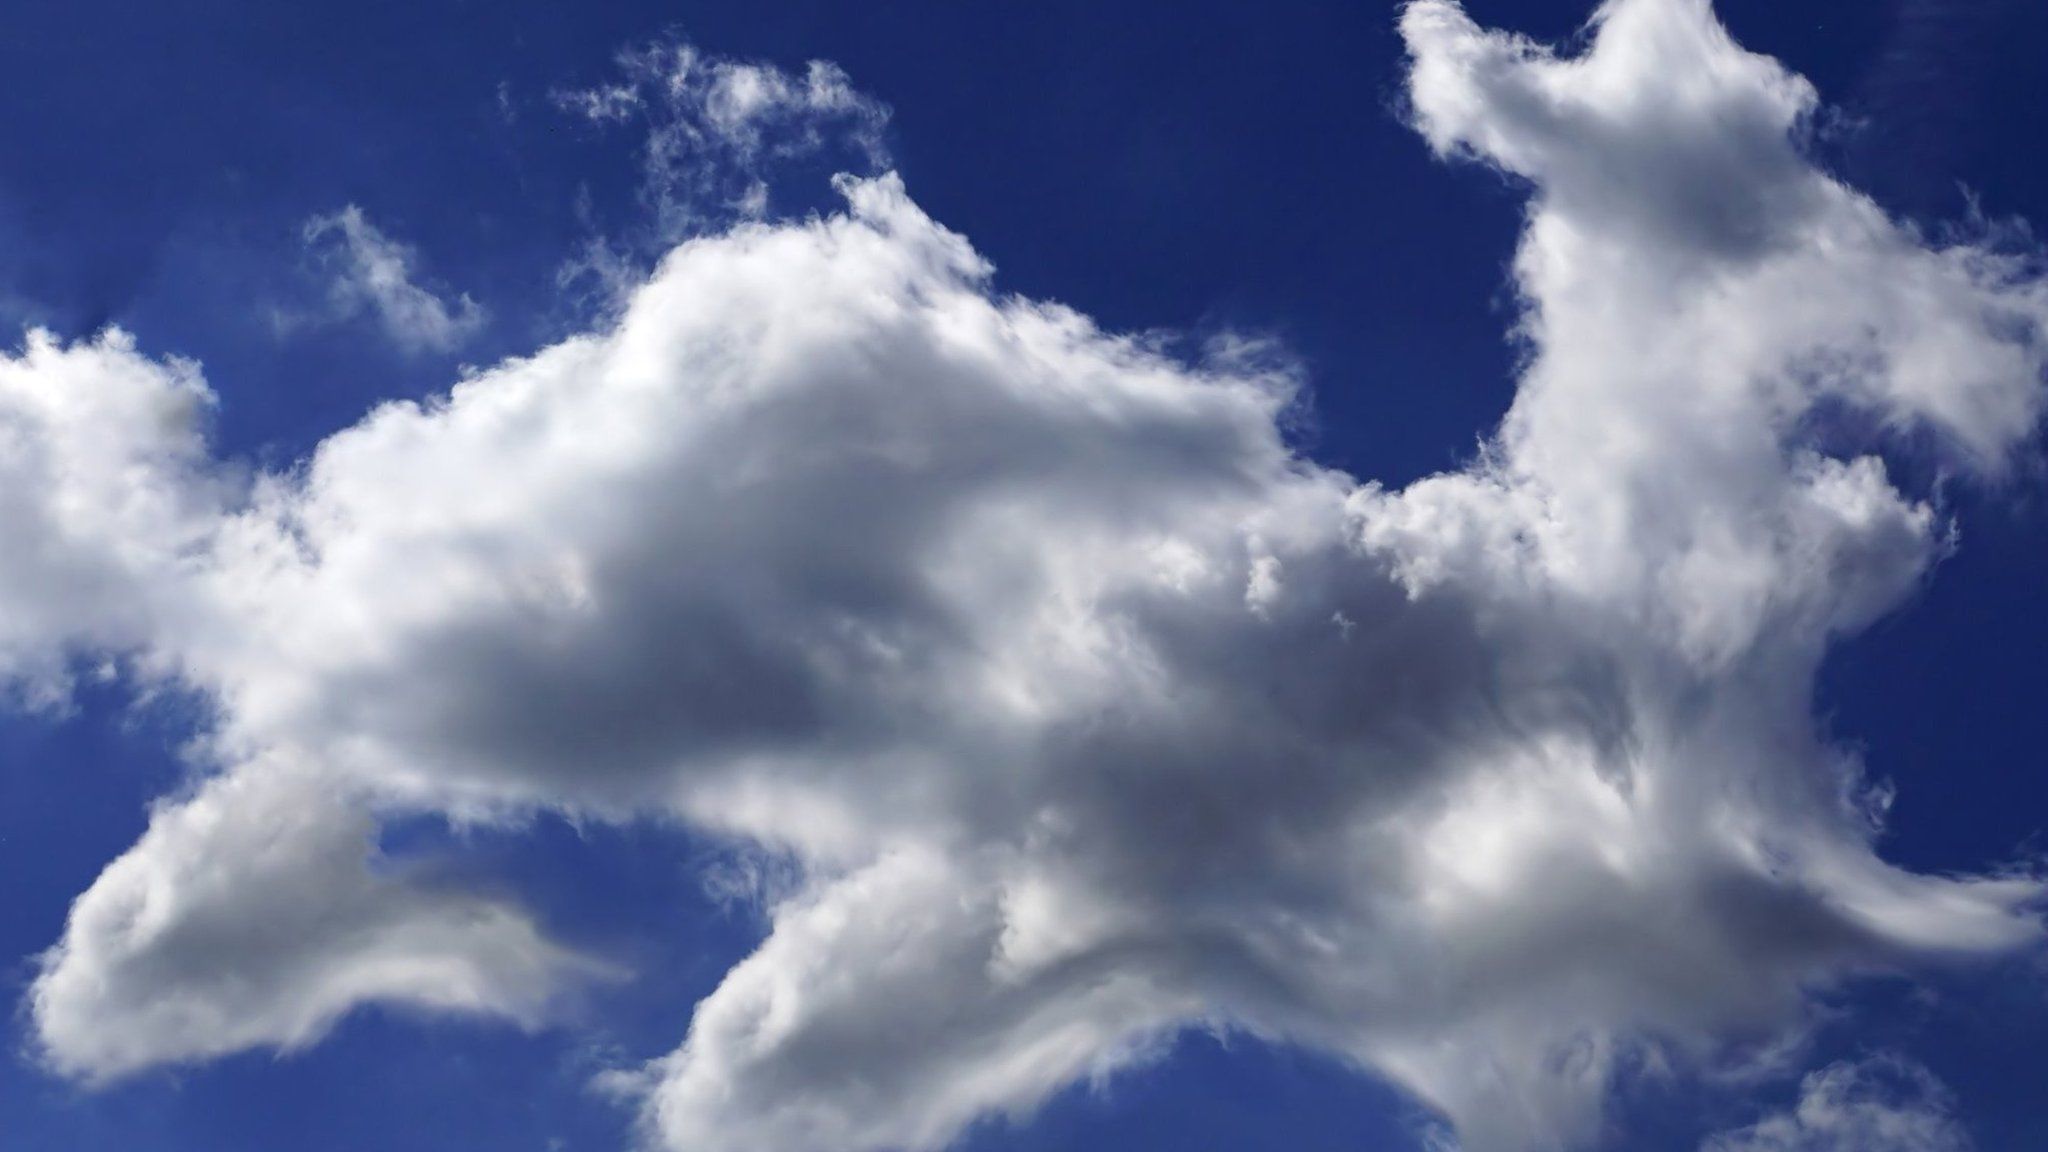 Cloud formation showing a dog